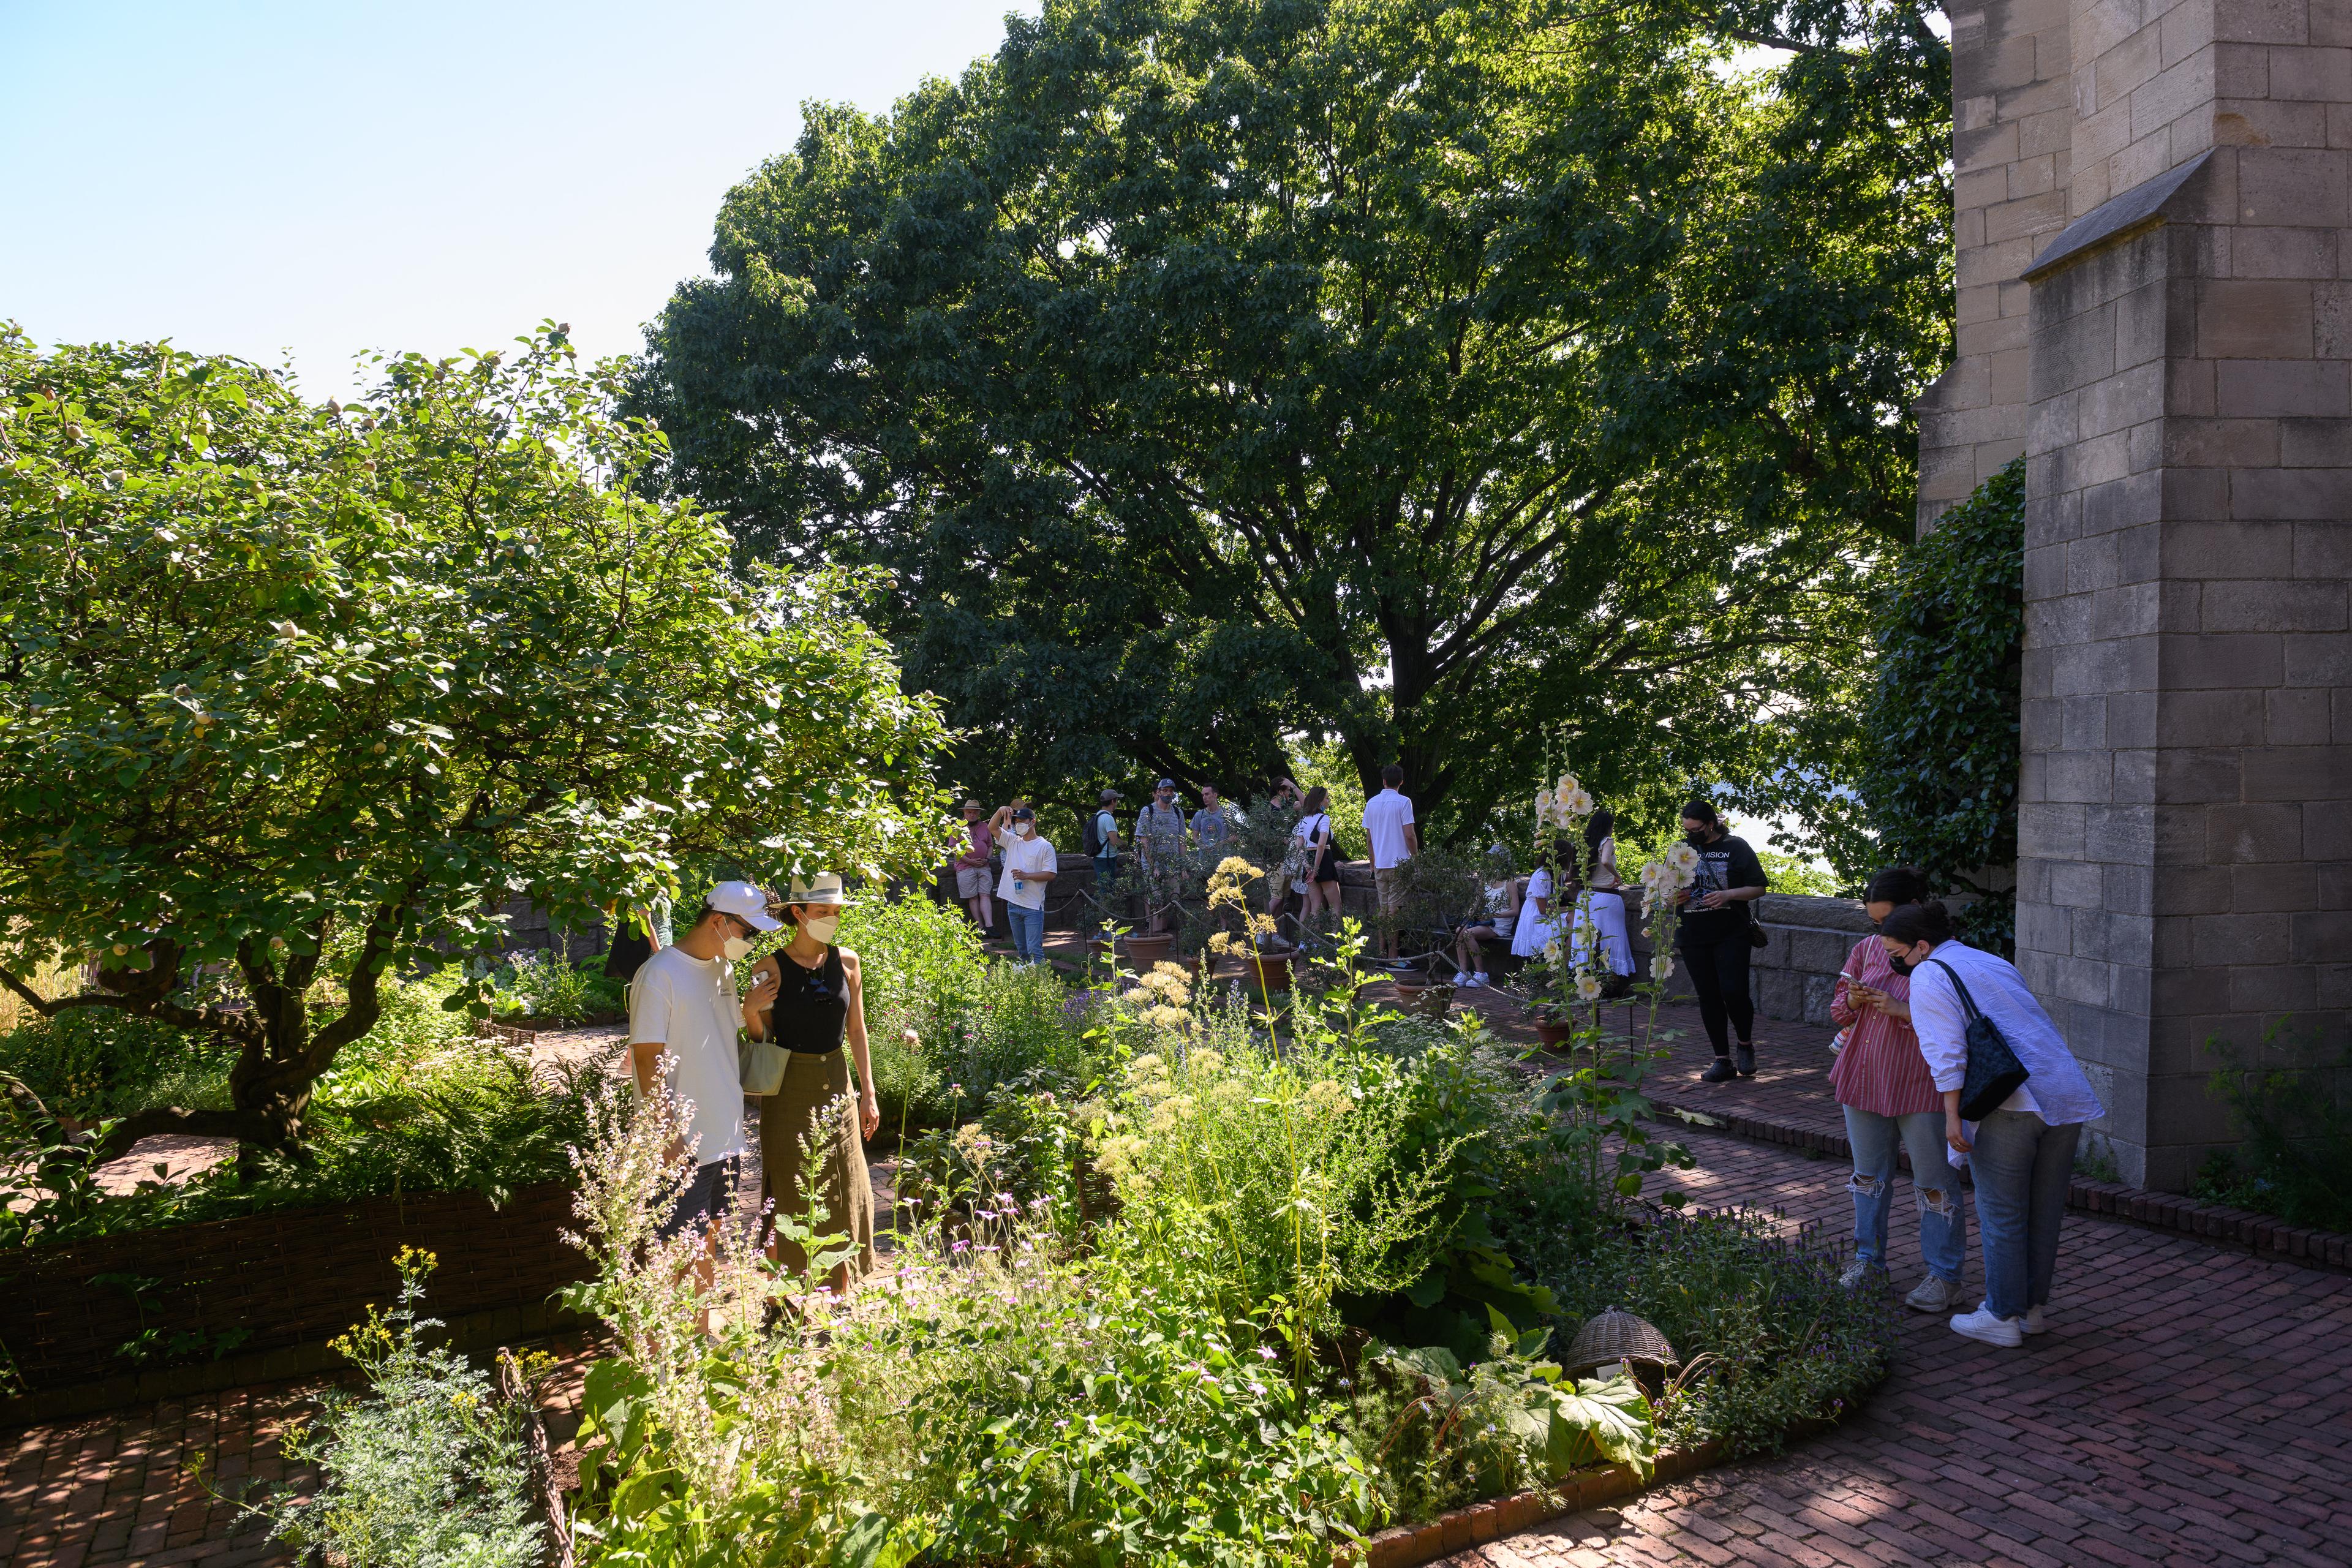 Visitors enjoy The Met Cloisters gardens on a sunny day. 